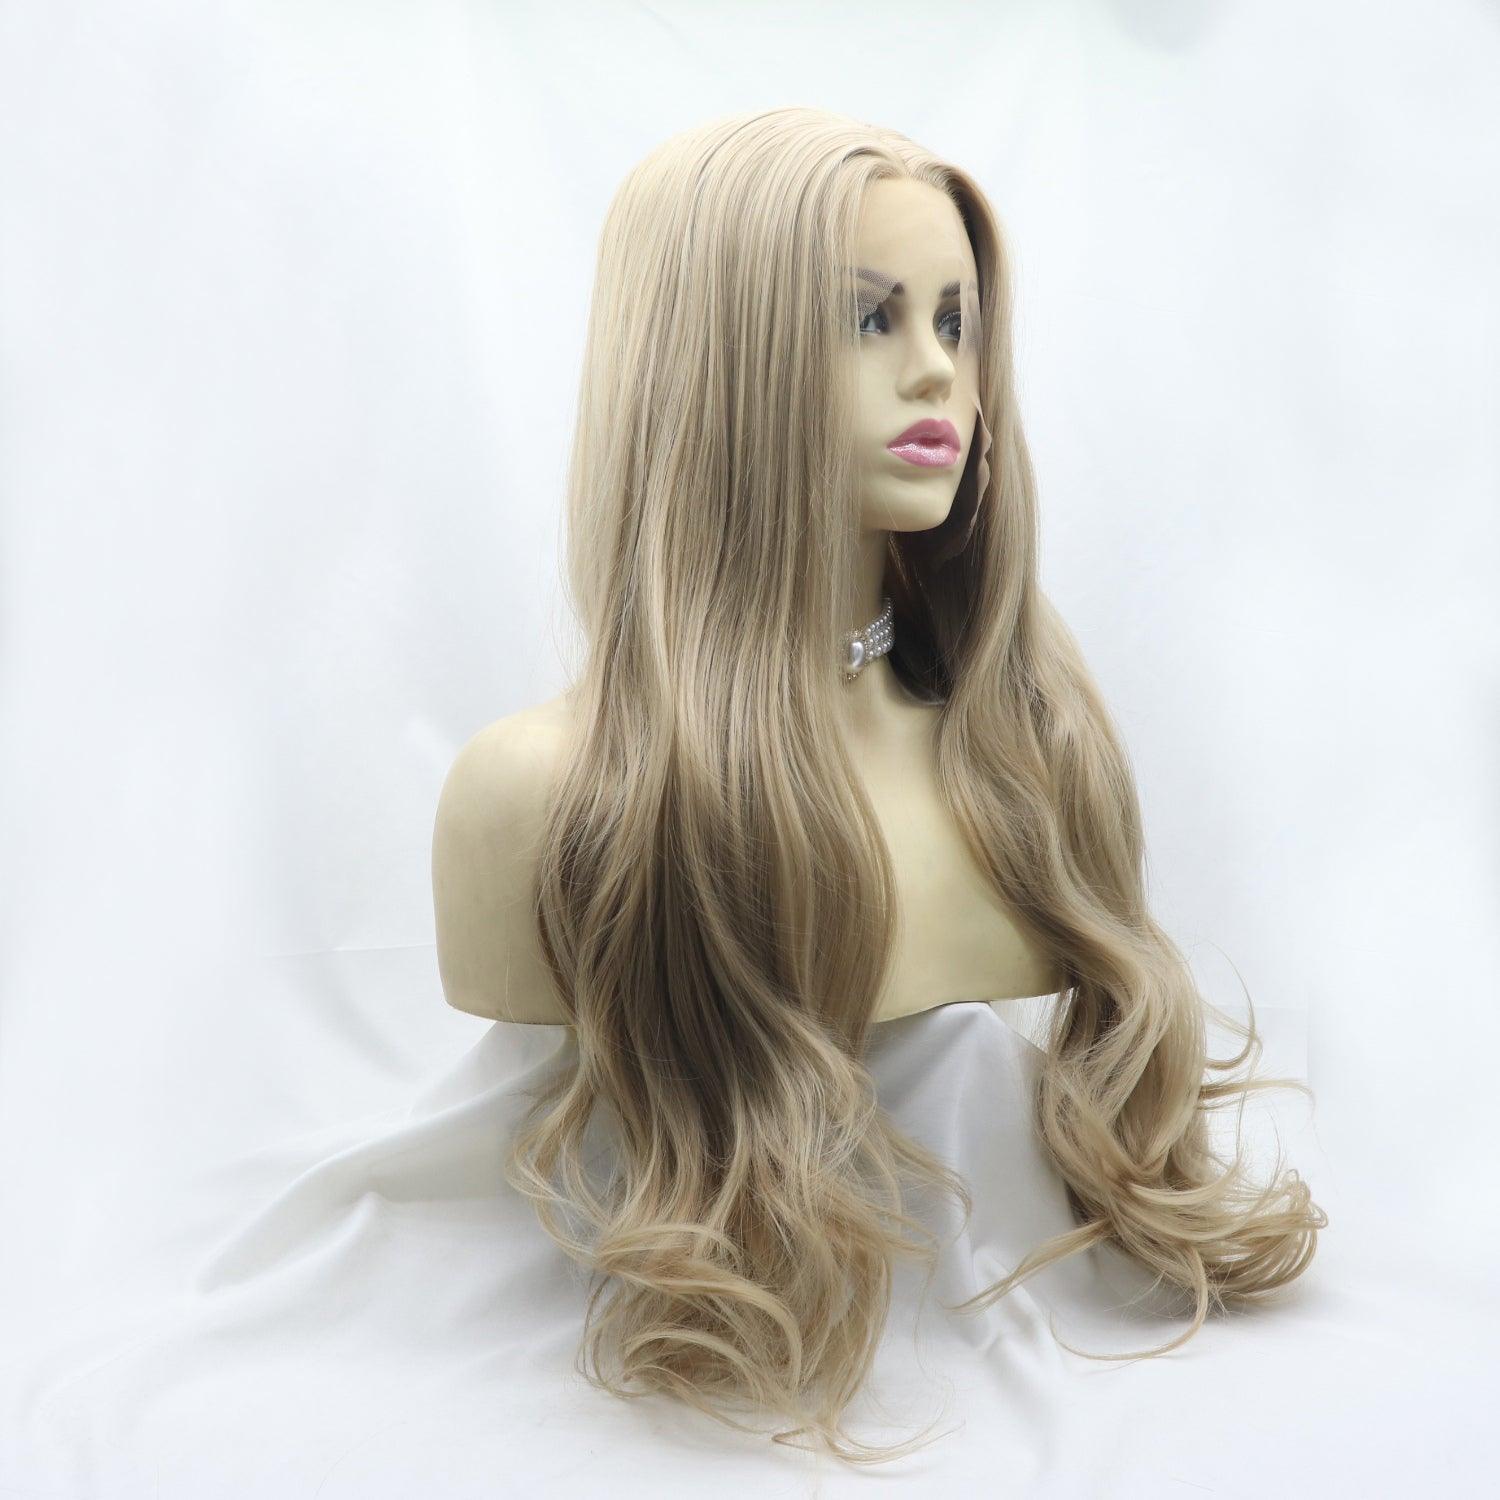 a wig with long blonde hair on a mannequin head